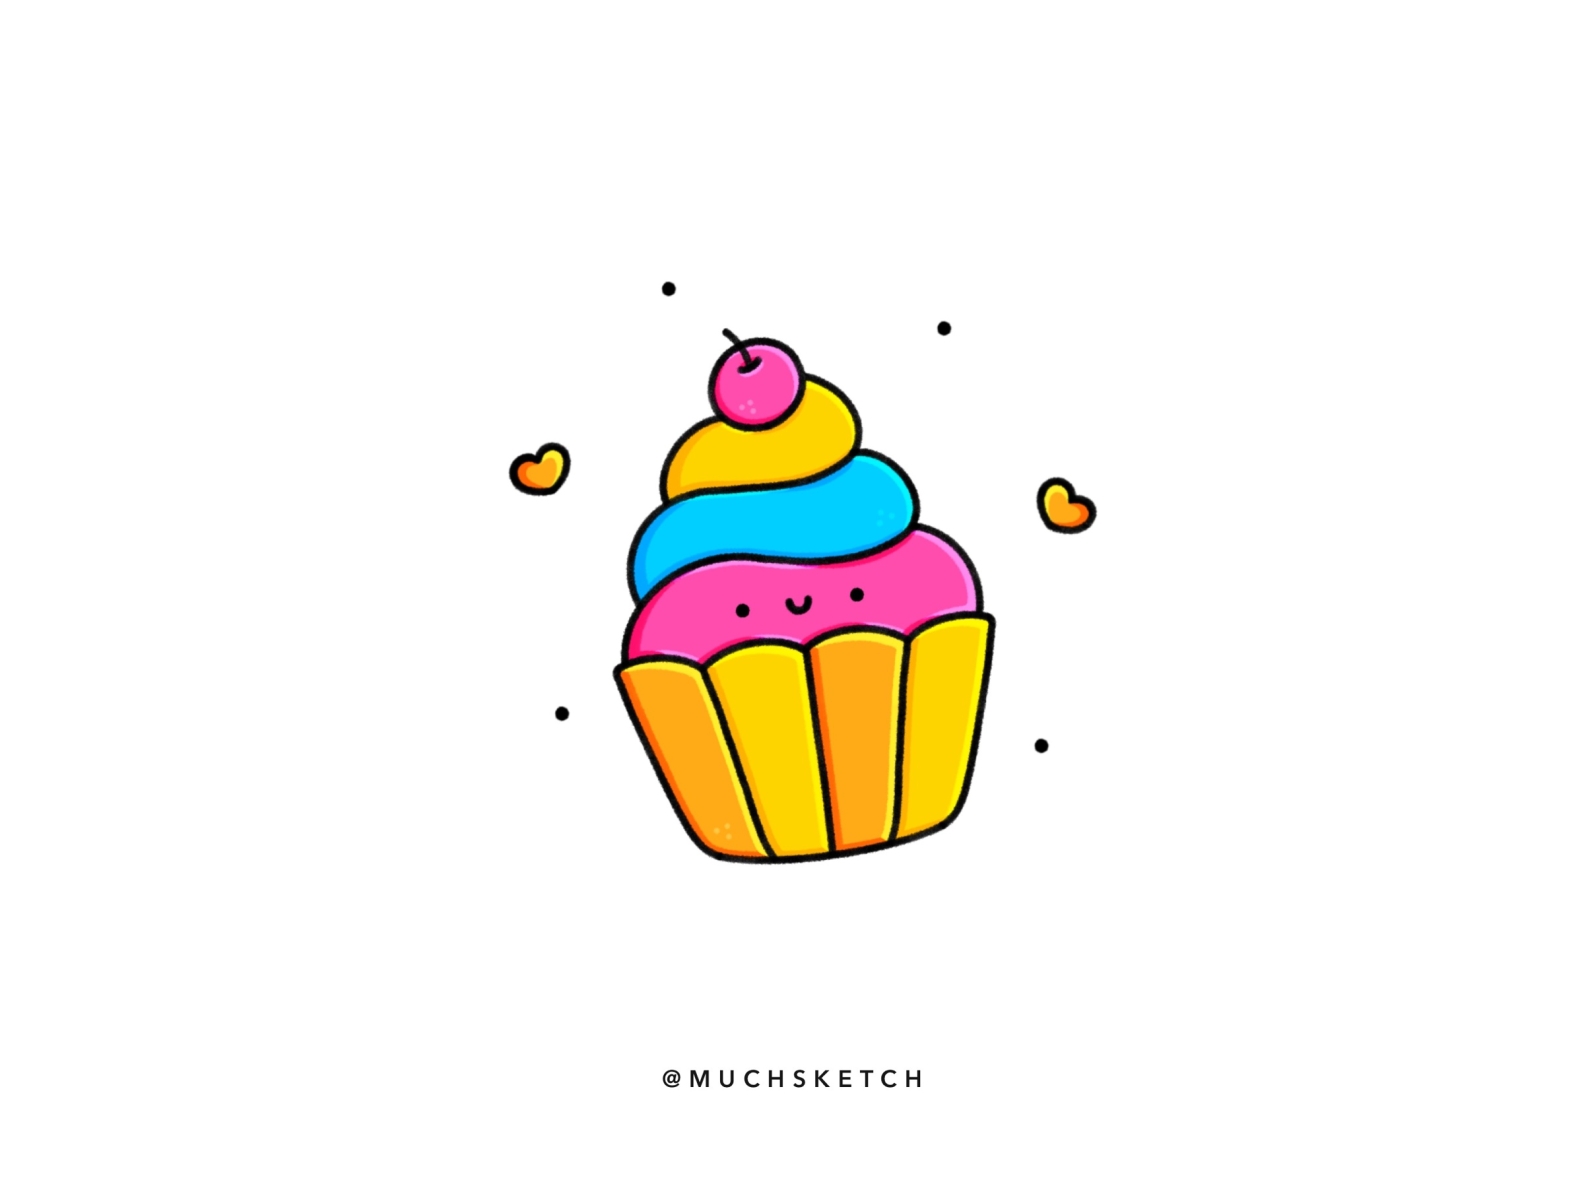 Cupcake 🧁 by Gaia / @muchsketch on Dribbble